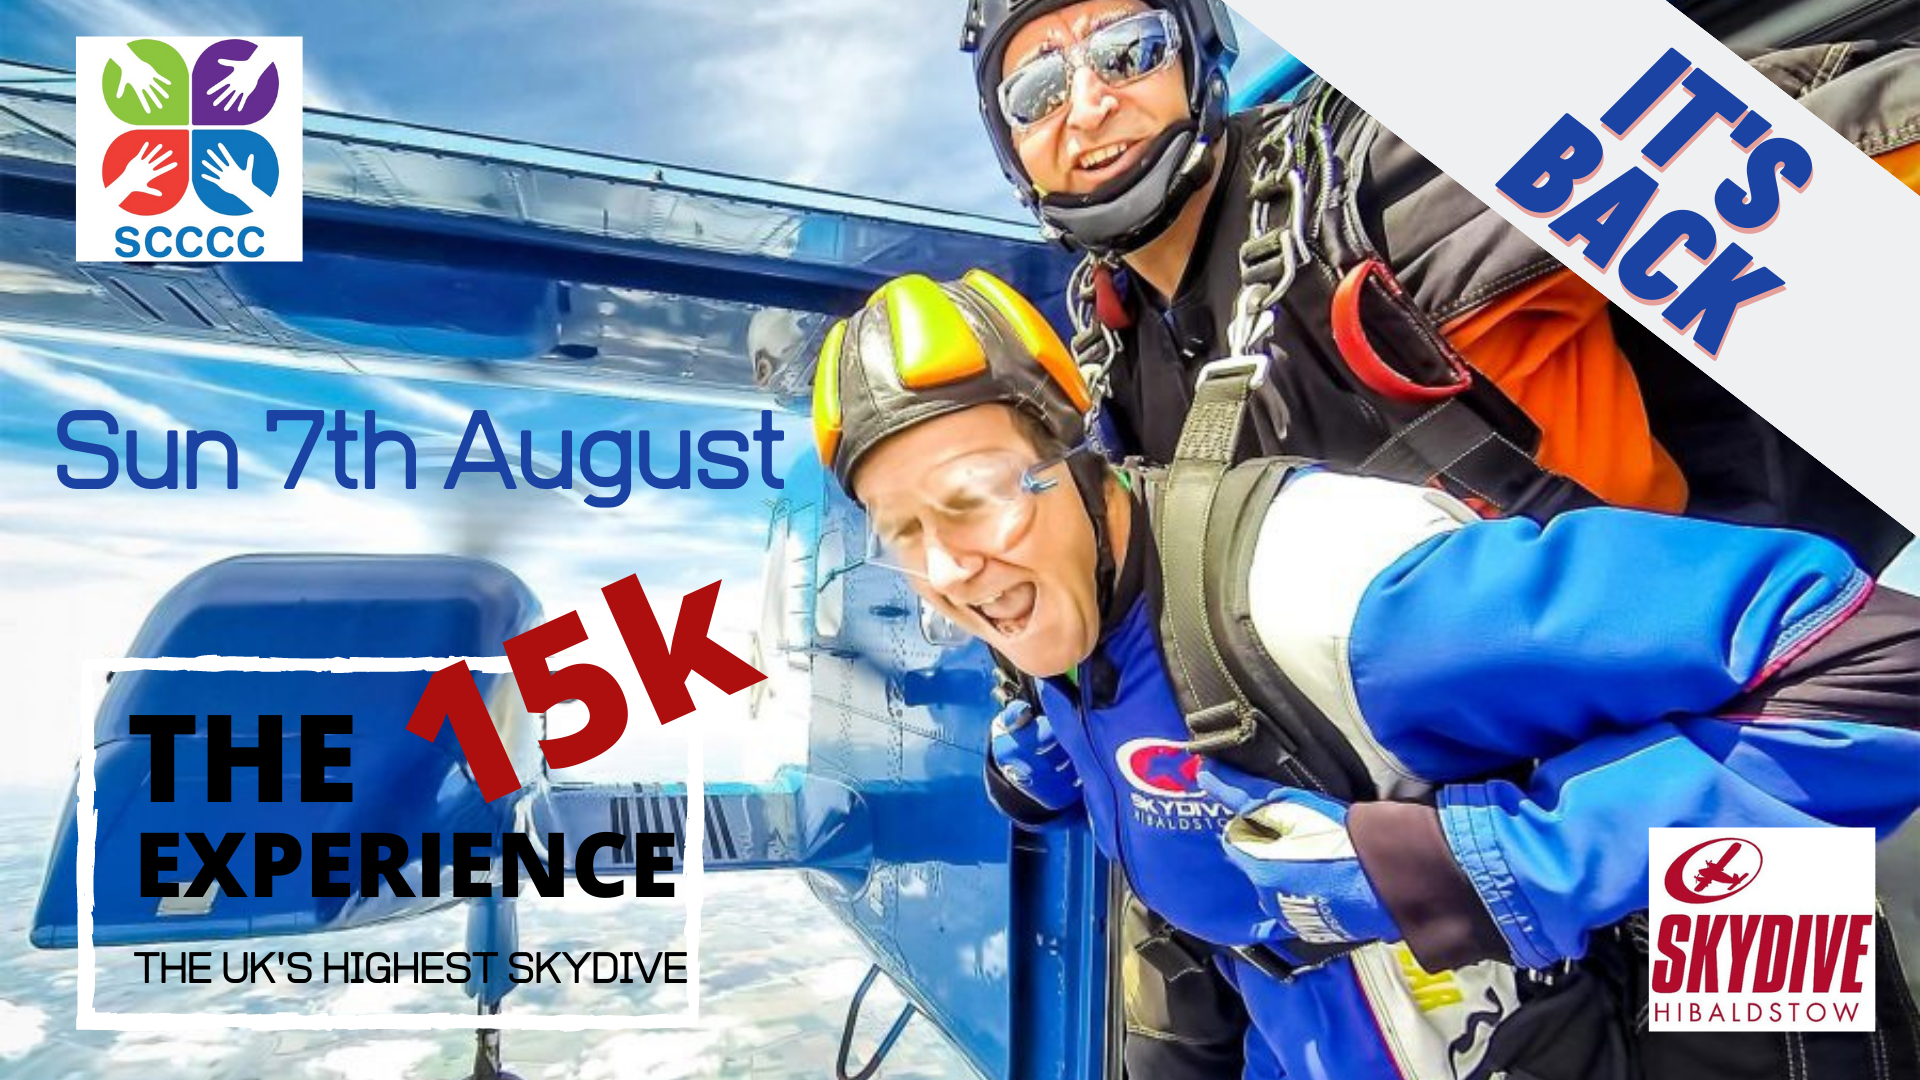 skydive-fb-event--(revised)-.png